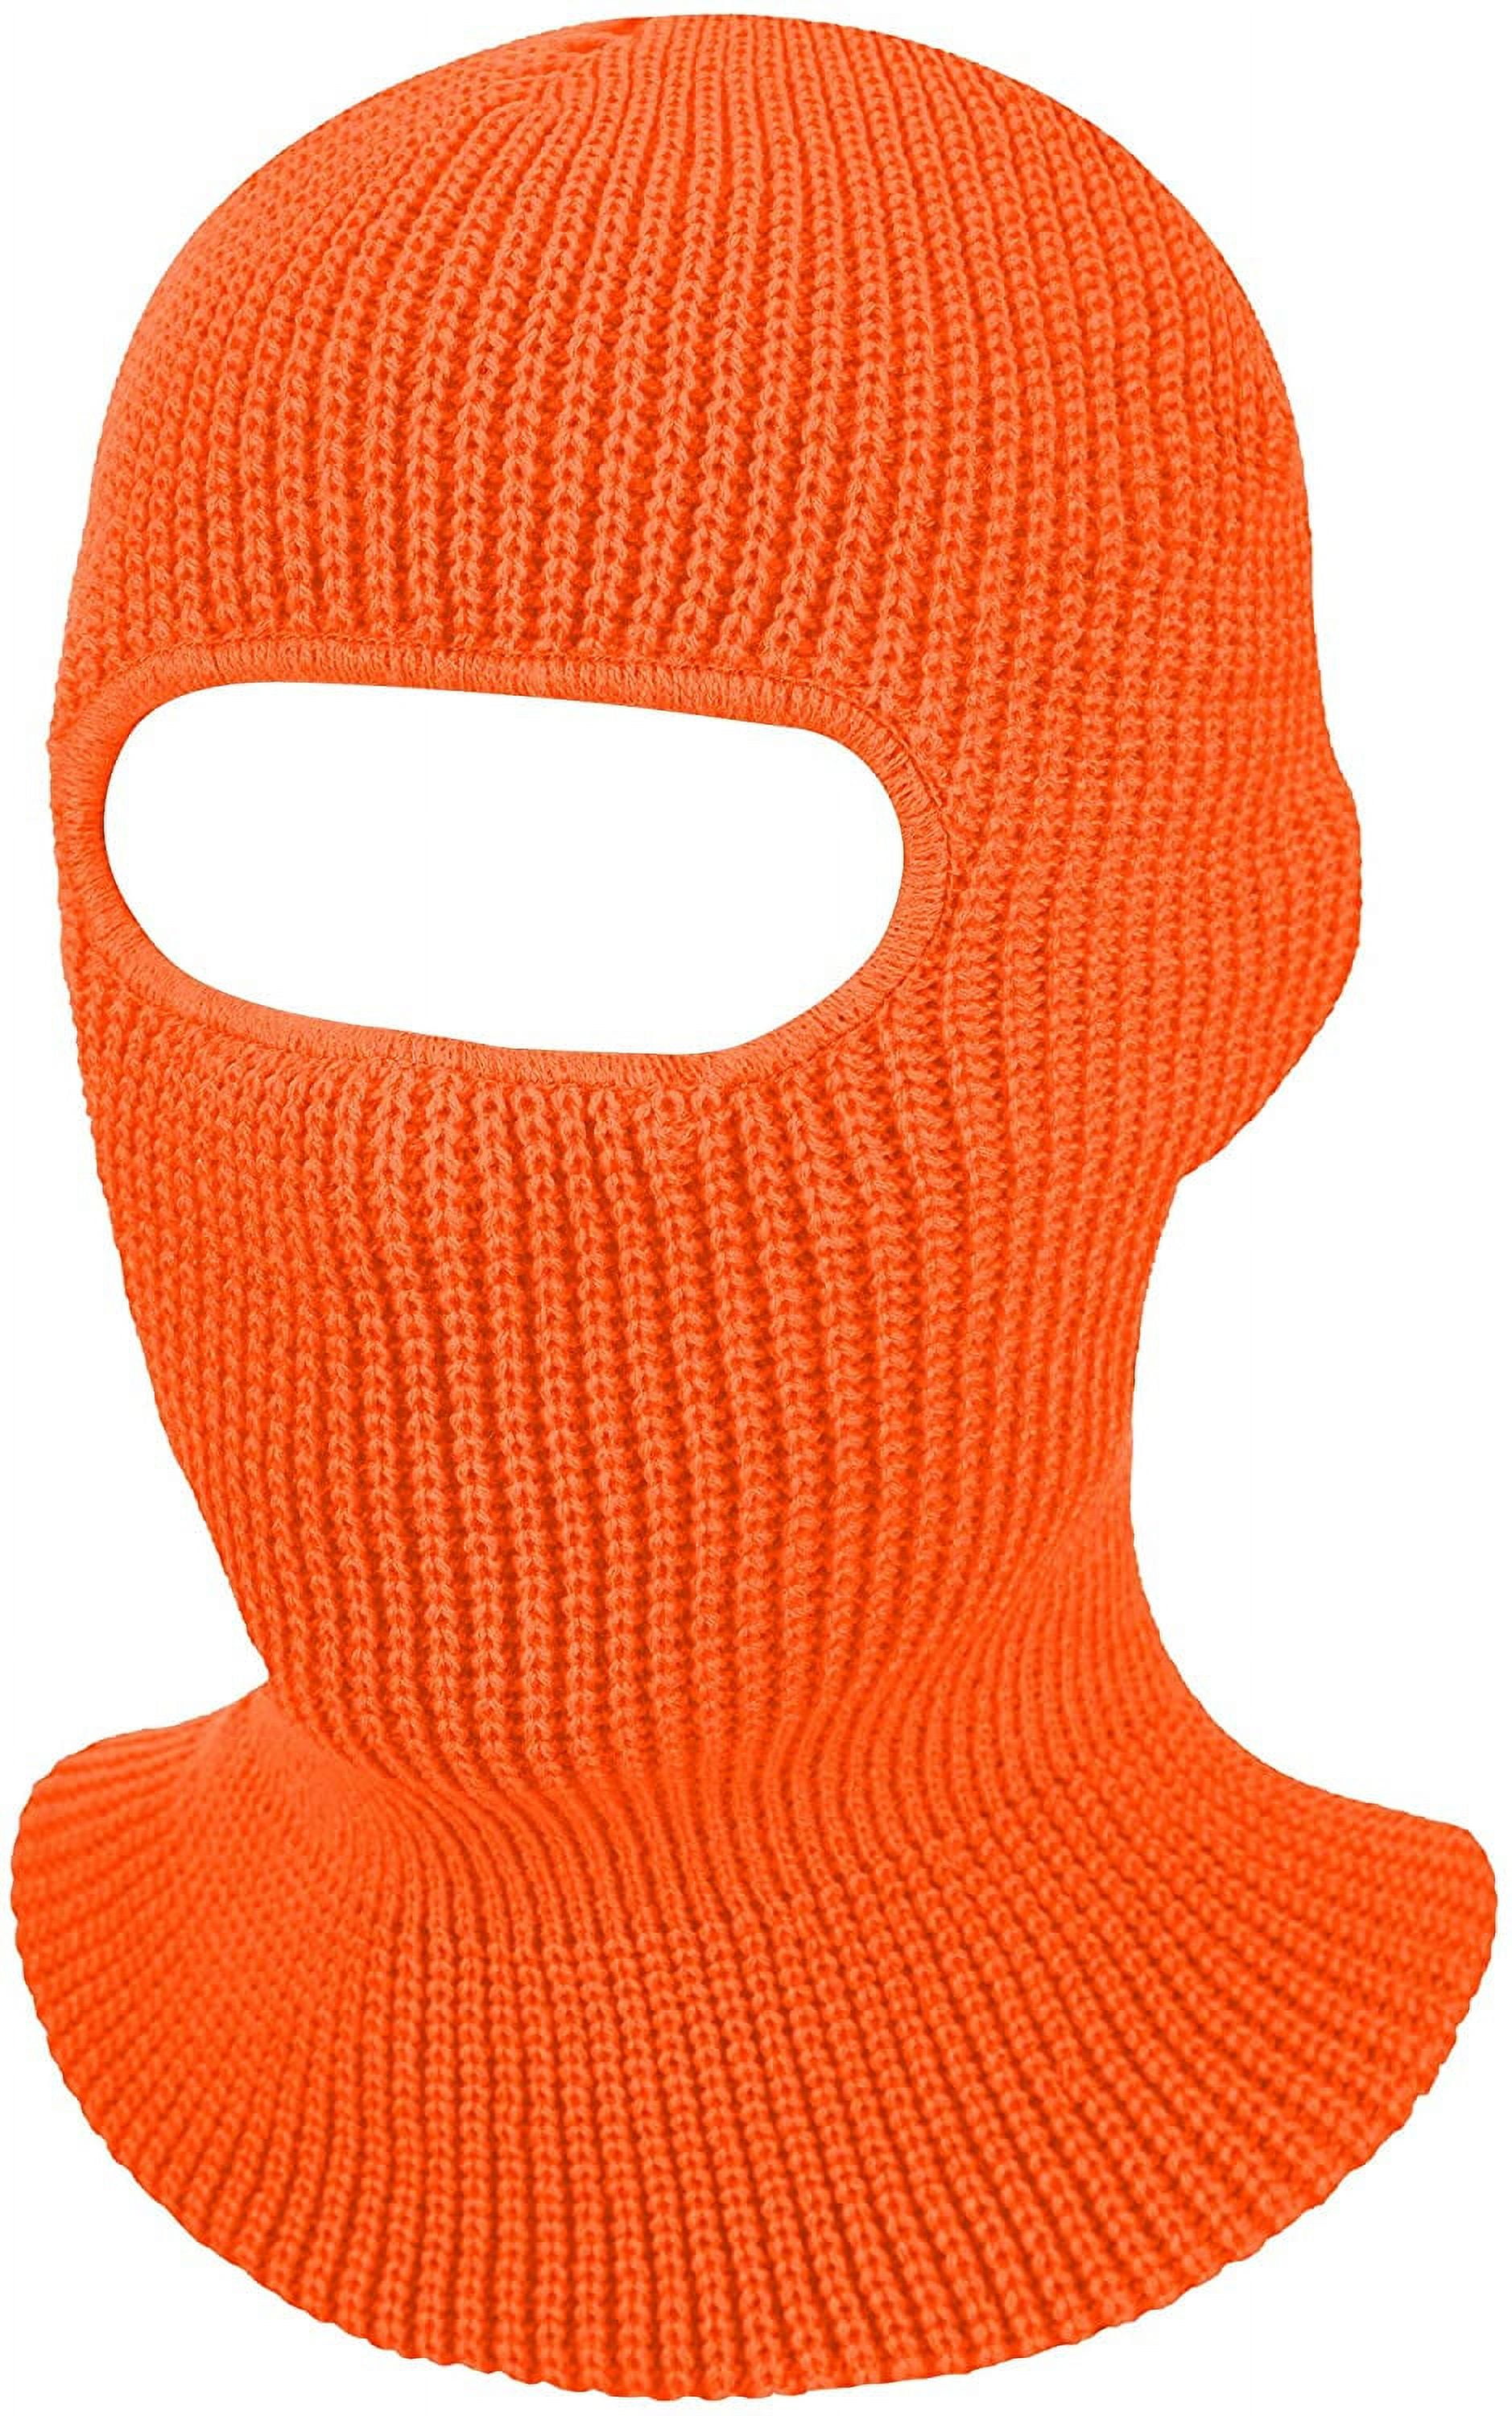 ZOELNIC Cover Face Balaclava Knitted Sports, Beanie for Warm Cap Winter Knit Mask Adult Balaclava Outdoor 1-Hole Unisex Pink Face Full Ski